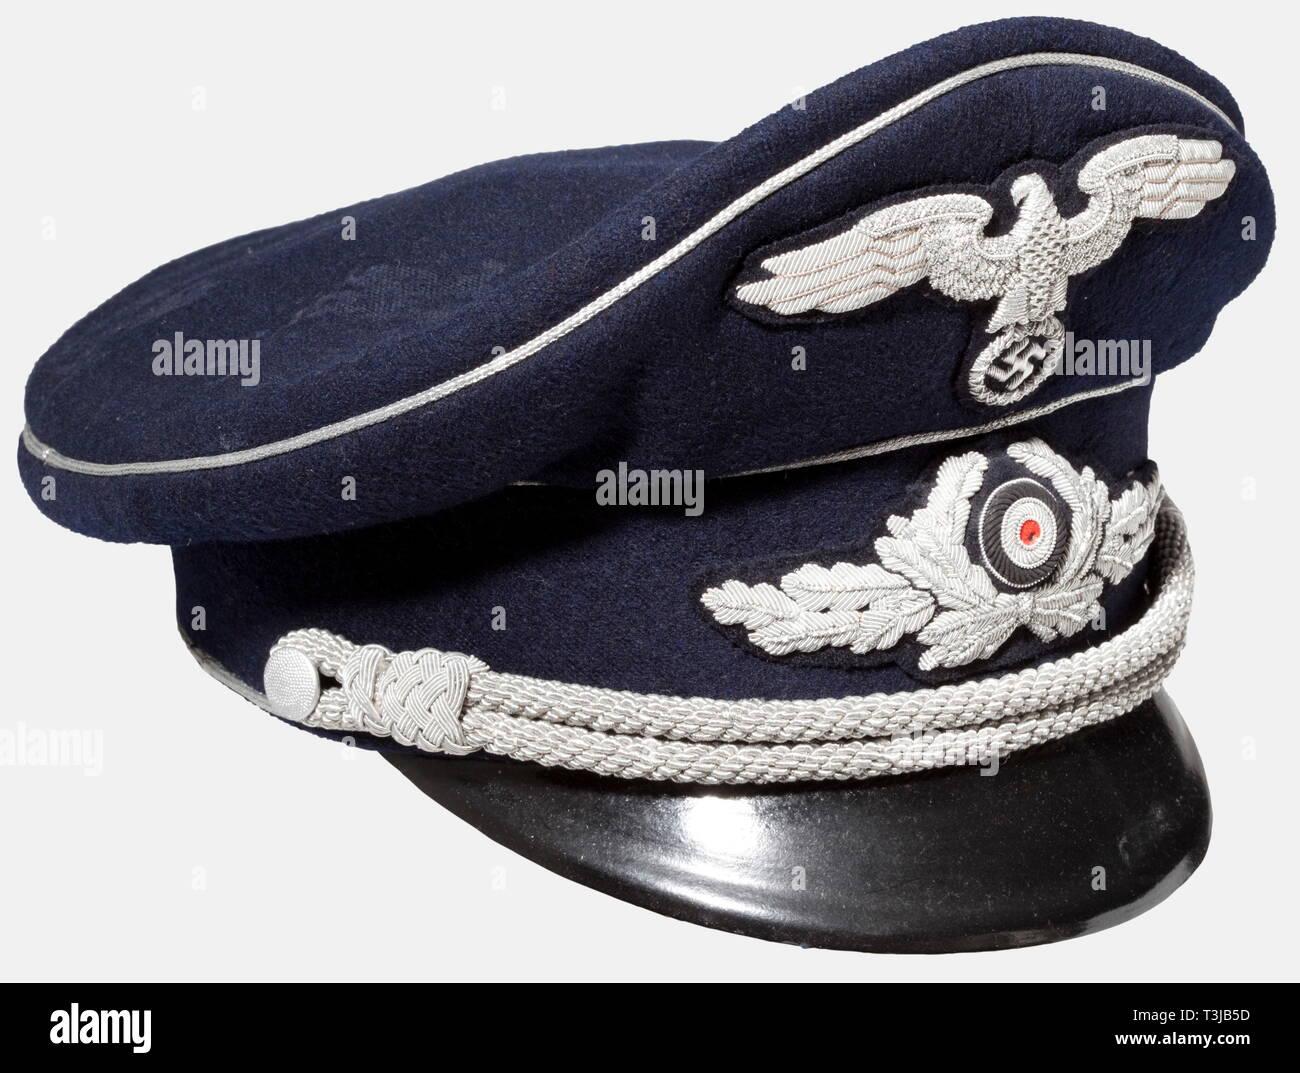 A visor cap, for diplomats and government officials Midnight-blue woolen material with silver piping, national eagle and oak leaf wreath of high quality silver embroidery. Silver cap cording. Gold-coloured silk liner, brown sweatband of ersatz material. Almost never worn, some roughness to the body, small damage to the cockade. historic, historical, 1930s, 1930s, 20th century, diplomacy, organisation, organization, organizations, organisations, Diplomatic service, foreign policy, Diplomatic services, object, objects, stills, clipping, cut out, cut-out, cu, No-Exclusive-Use | Editorial-Use-Only Stock Photo